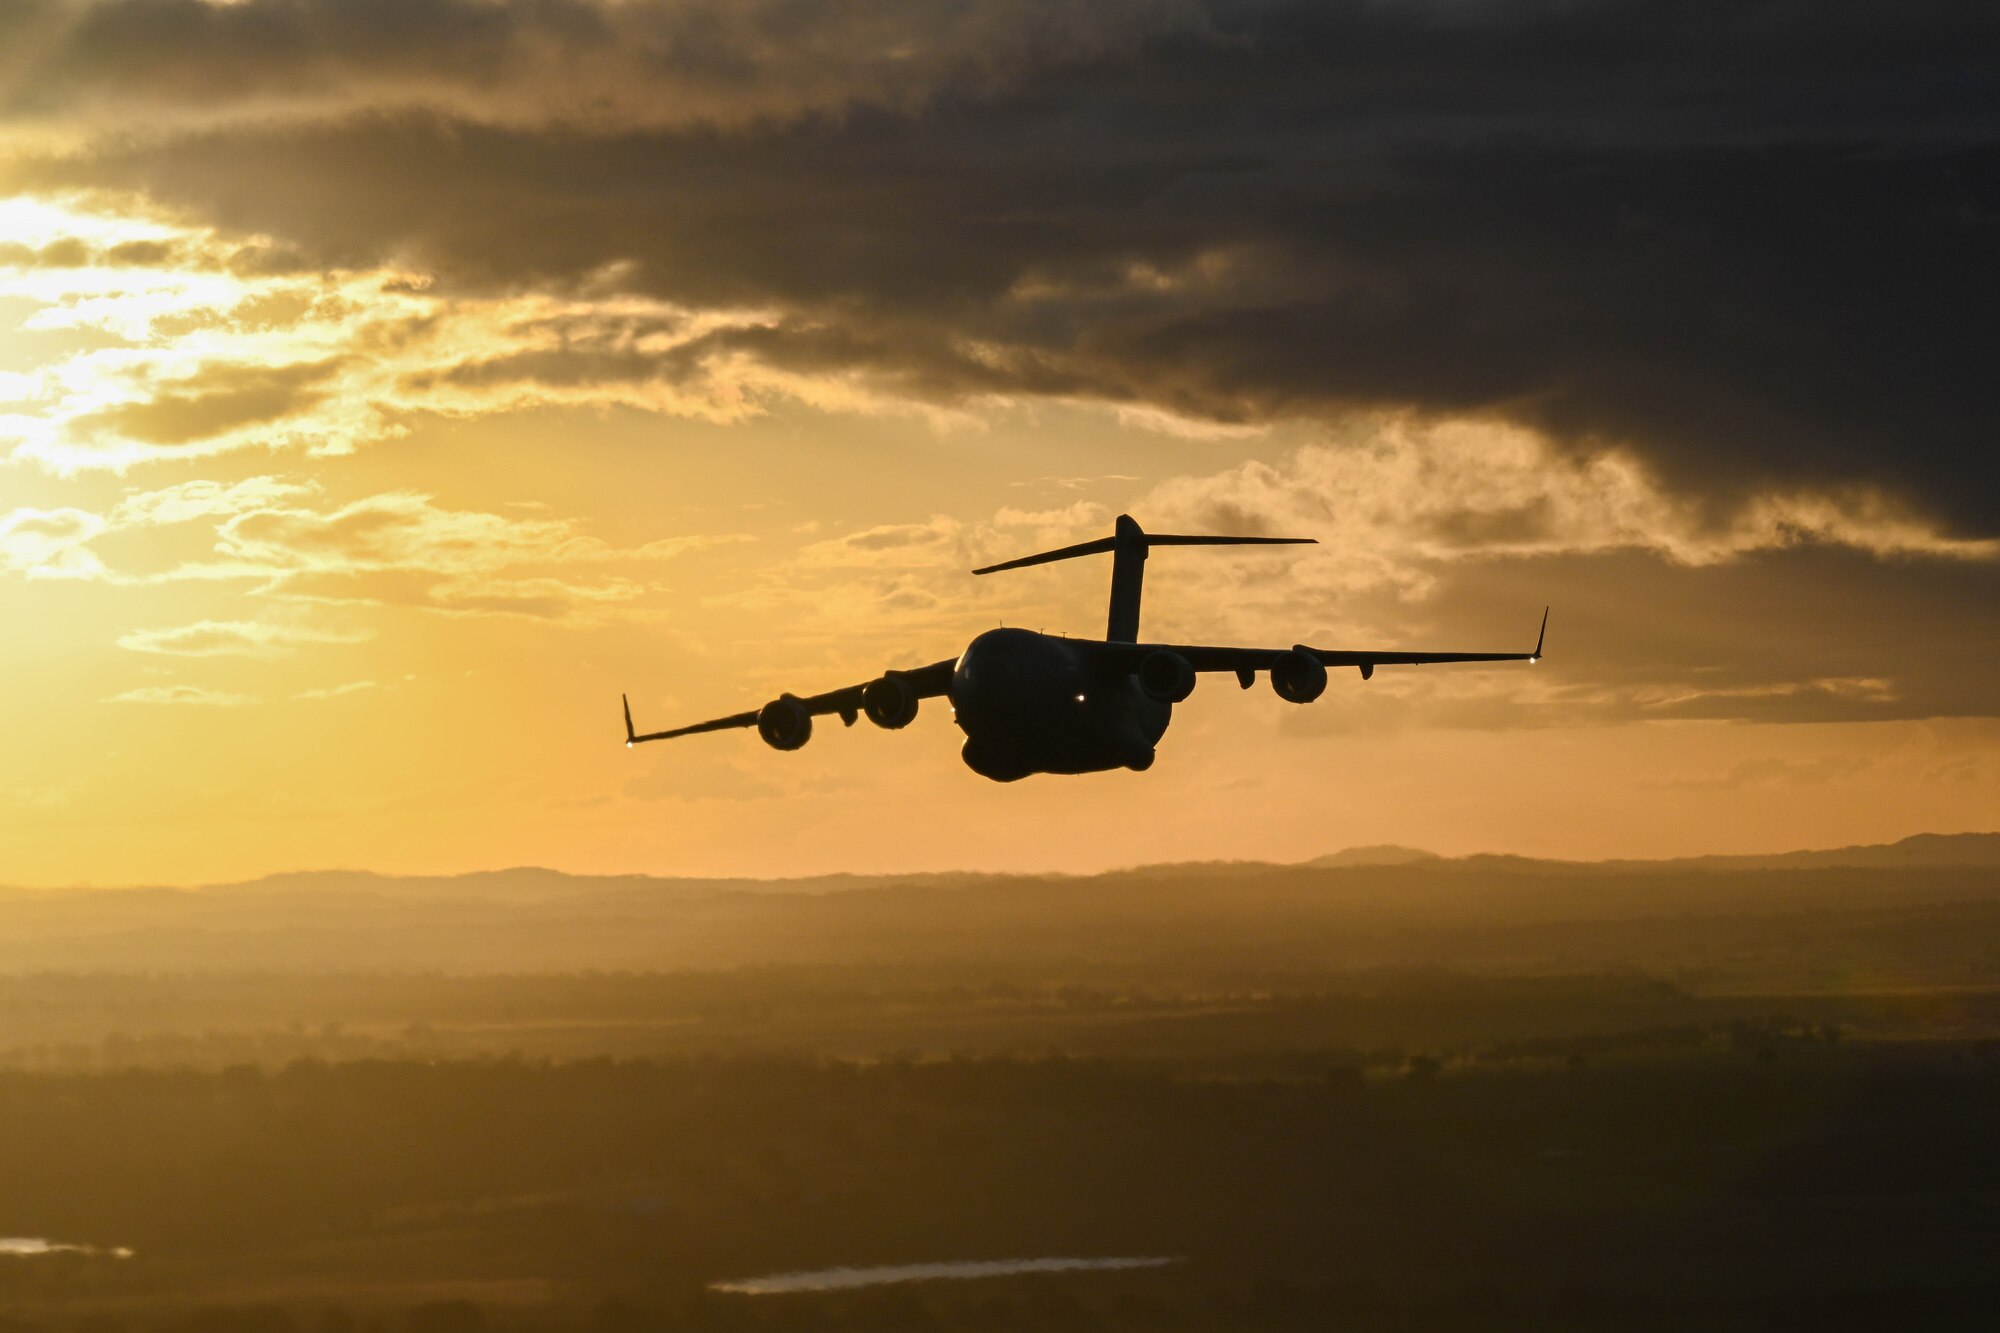 A Royal Australian Air Force C-17 Globemaster III flies in a two-ship formation during a training flight for Global Dexterity 23-1 at RAAF Base Amberley, Queensland, April 27, 2023. Exercise Global Dexterity 2023 is being conducted at Royal Australian Air Force Base Amberley, and is designed to help enhance air cooperation between the U.S. and Australia and increase our combined capabilities, improving security and stability in the Indo-Pacific region. (U.S. Air Force photo by Senior Airman Makensie Cooper)